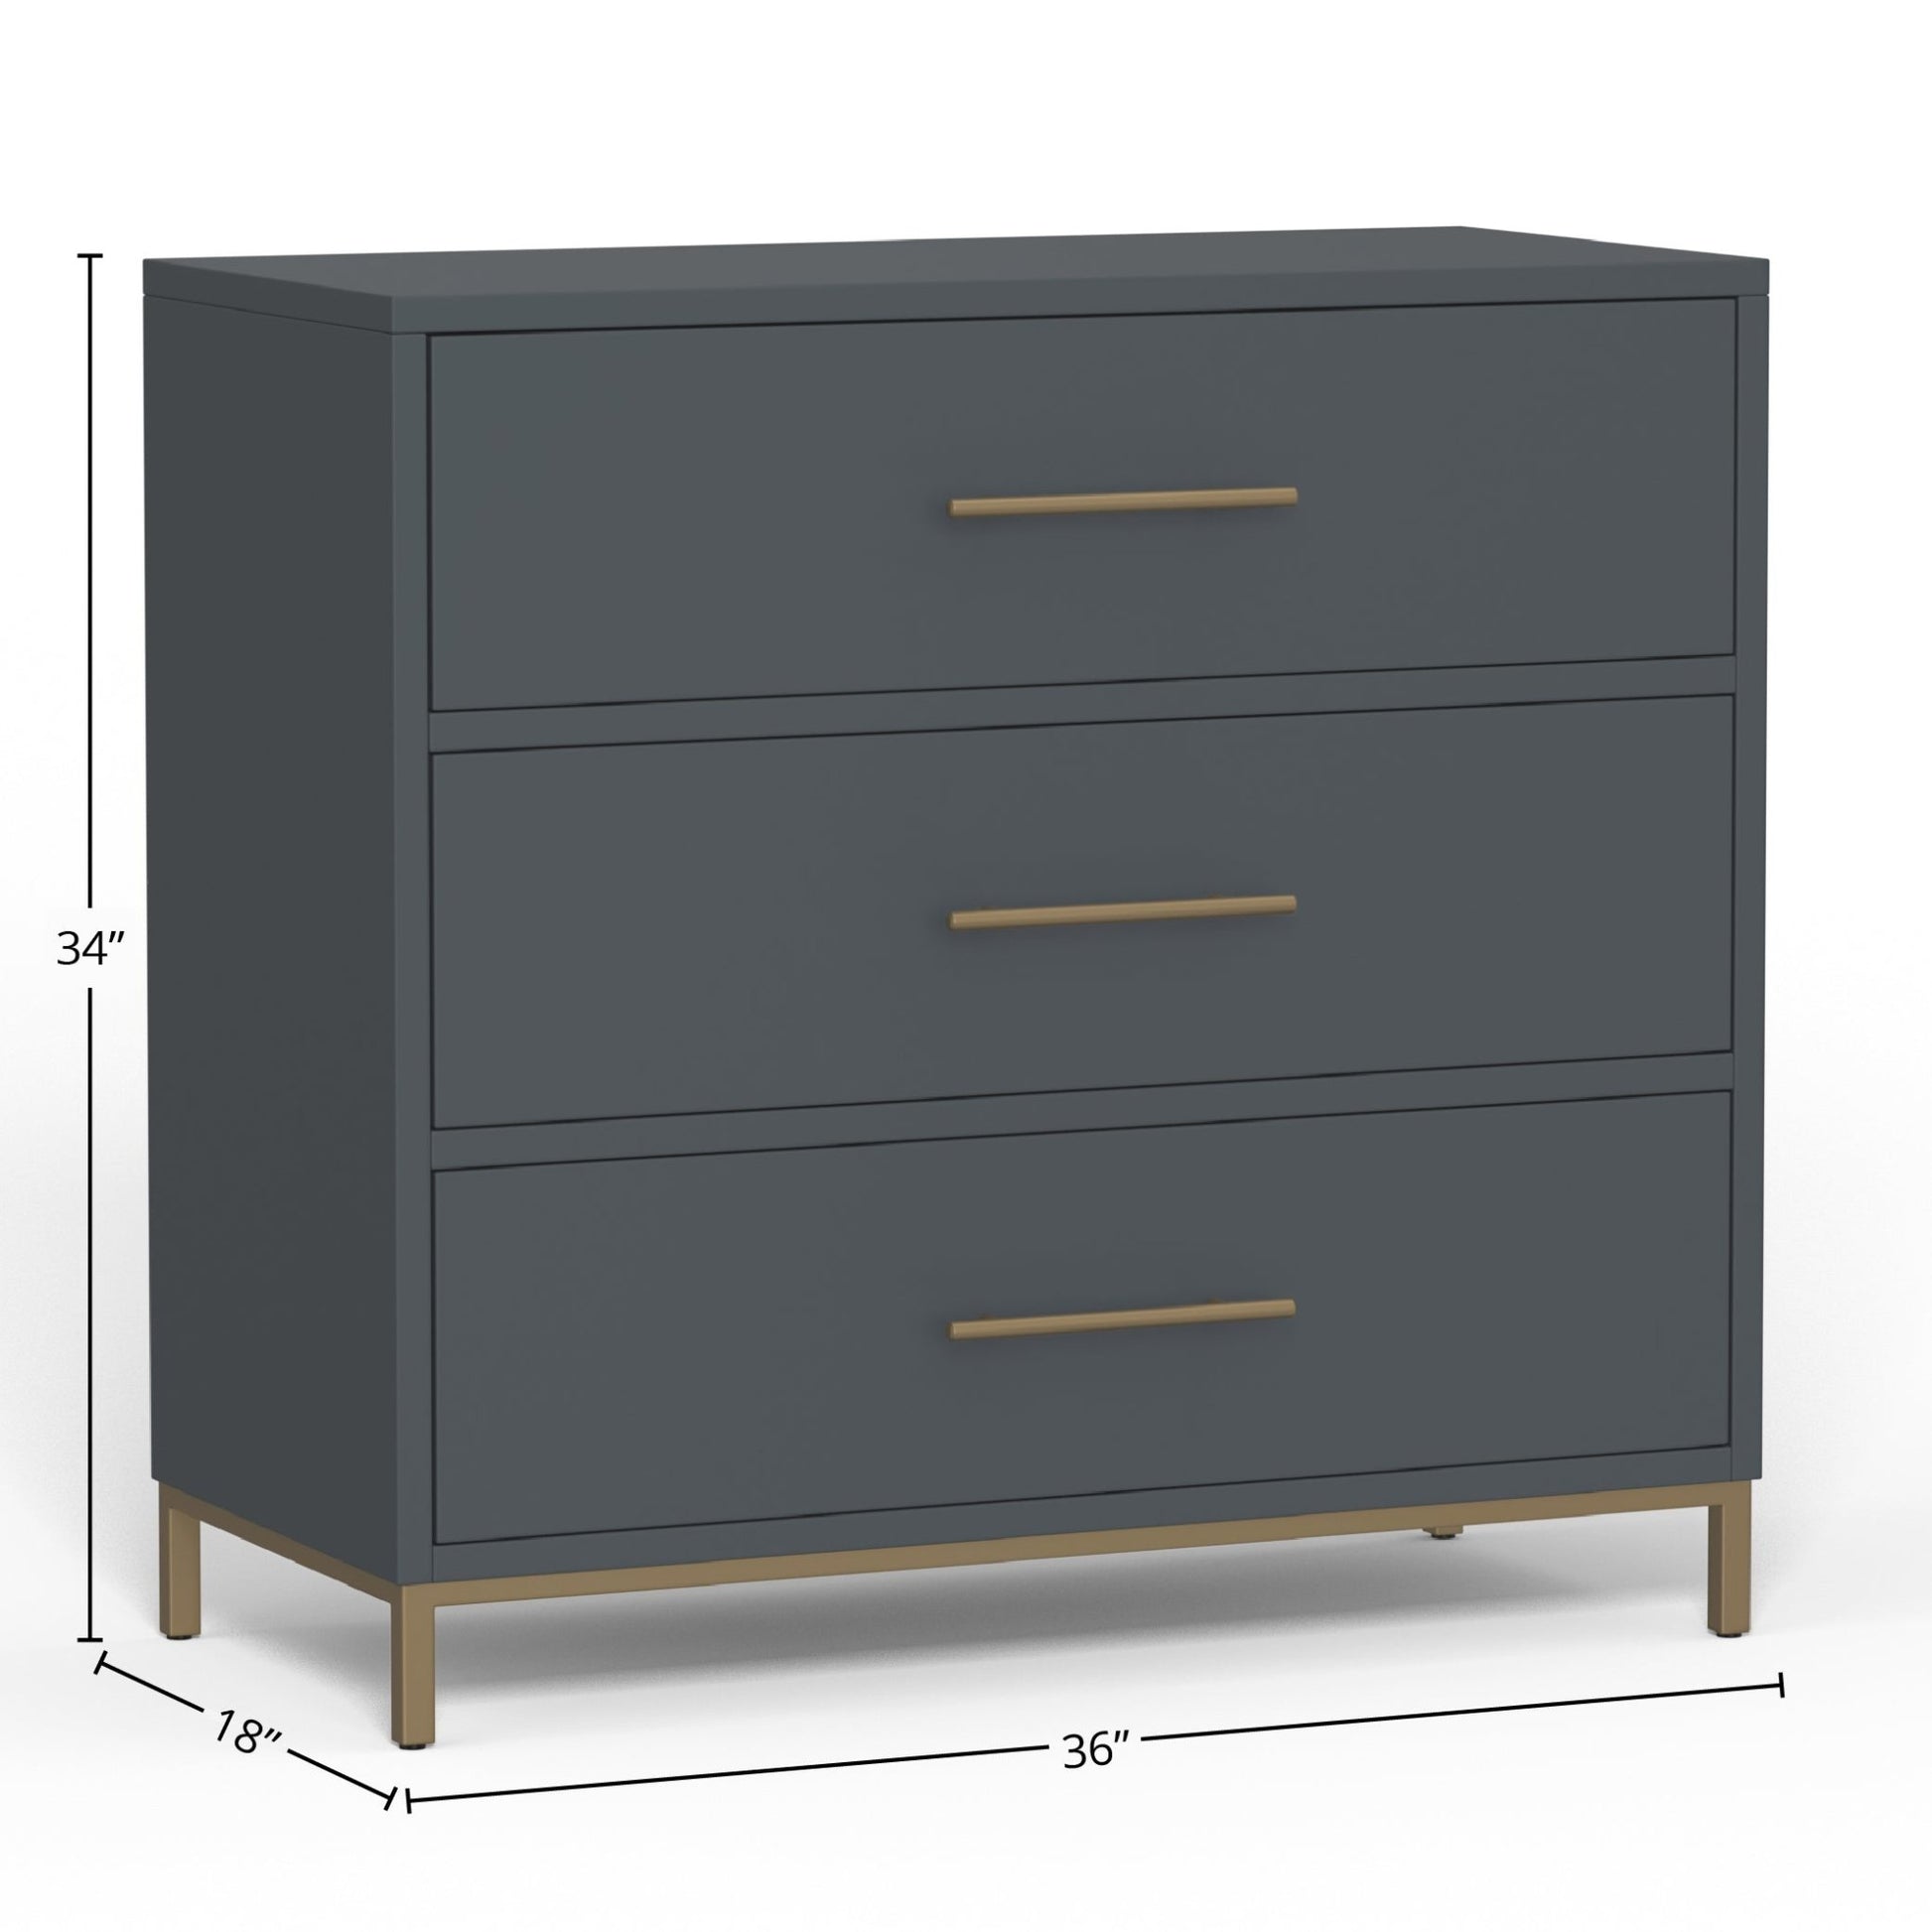 Madelyn Three Drawer Small Chest, Slate Gray - Alpine Furniture